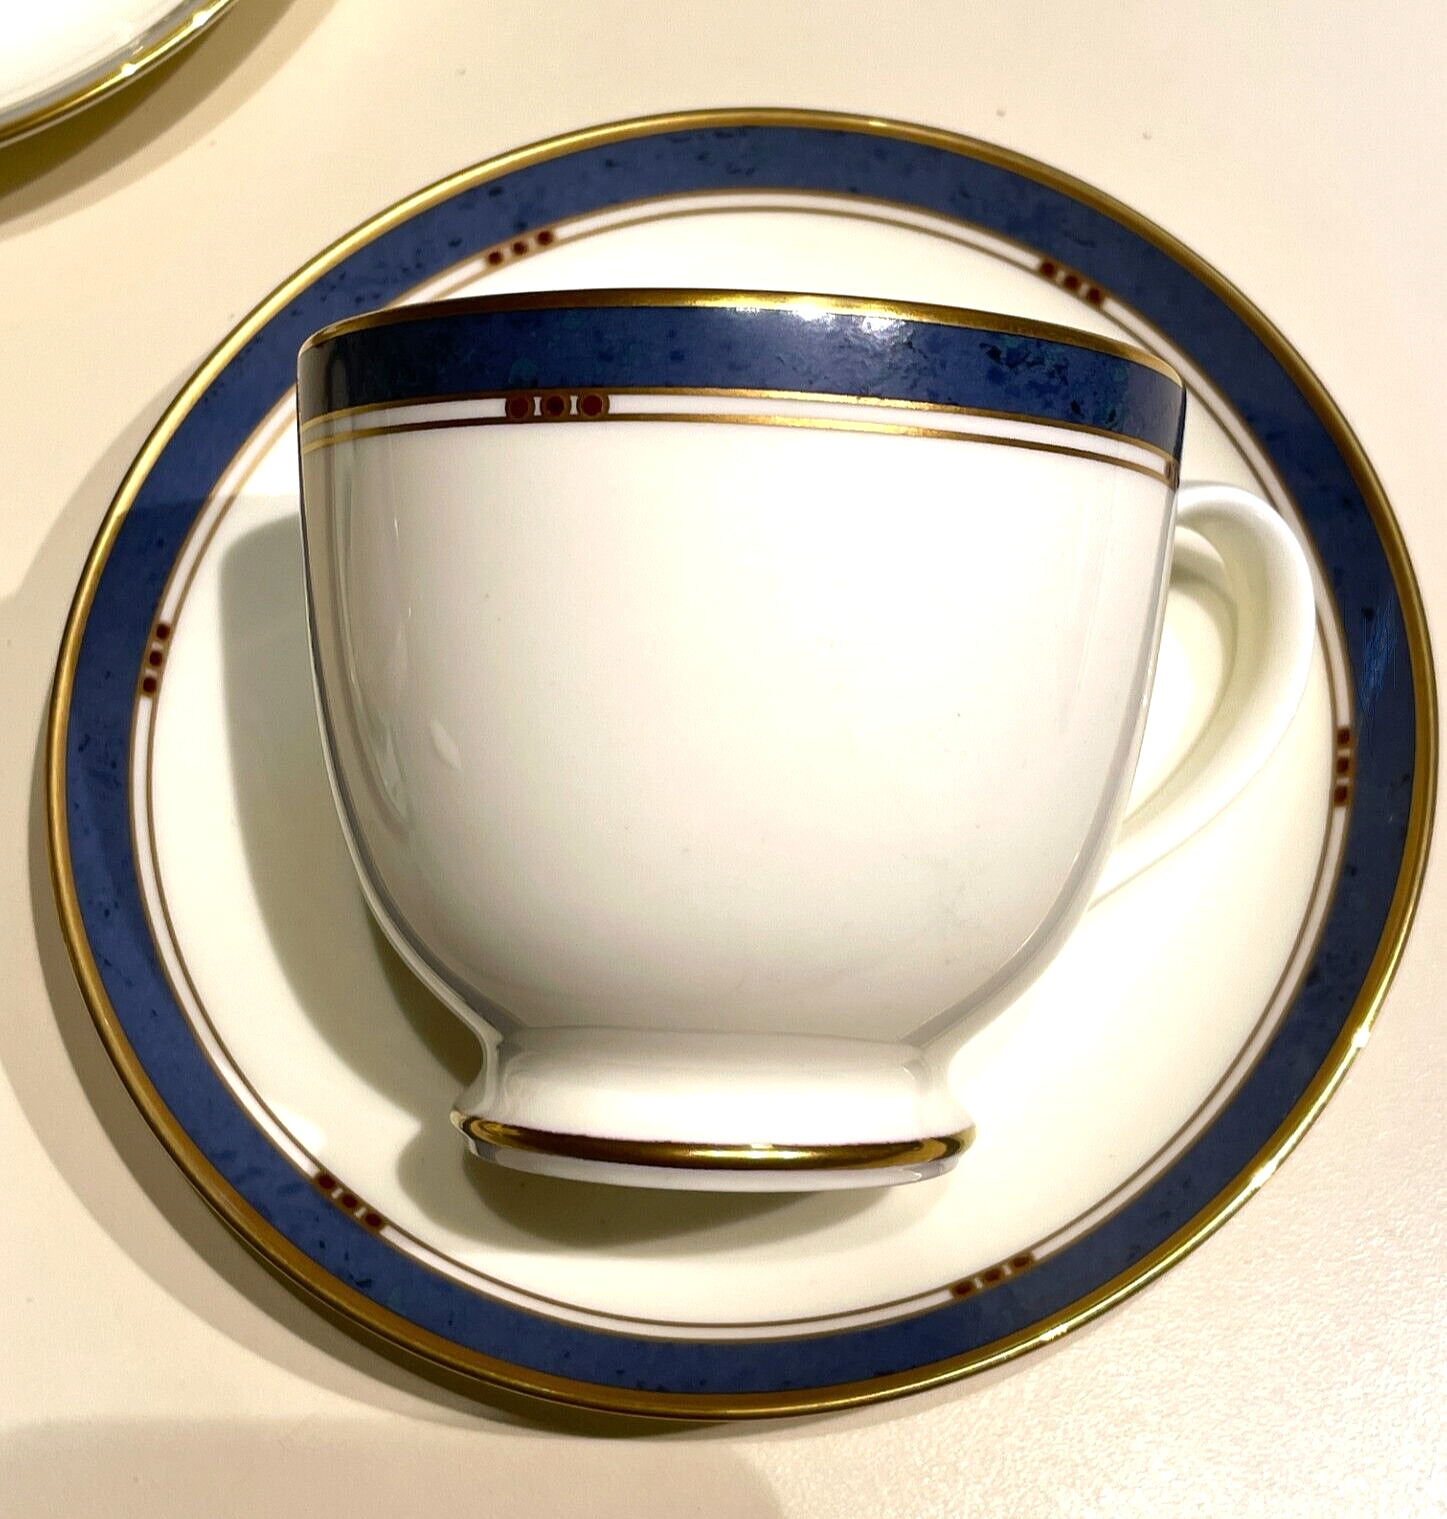 Pfaltzgraff Bone China - Hampton - Footed Cup & Saucer. 4 Sets available. Mint